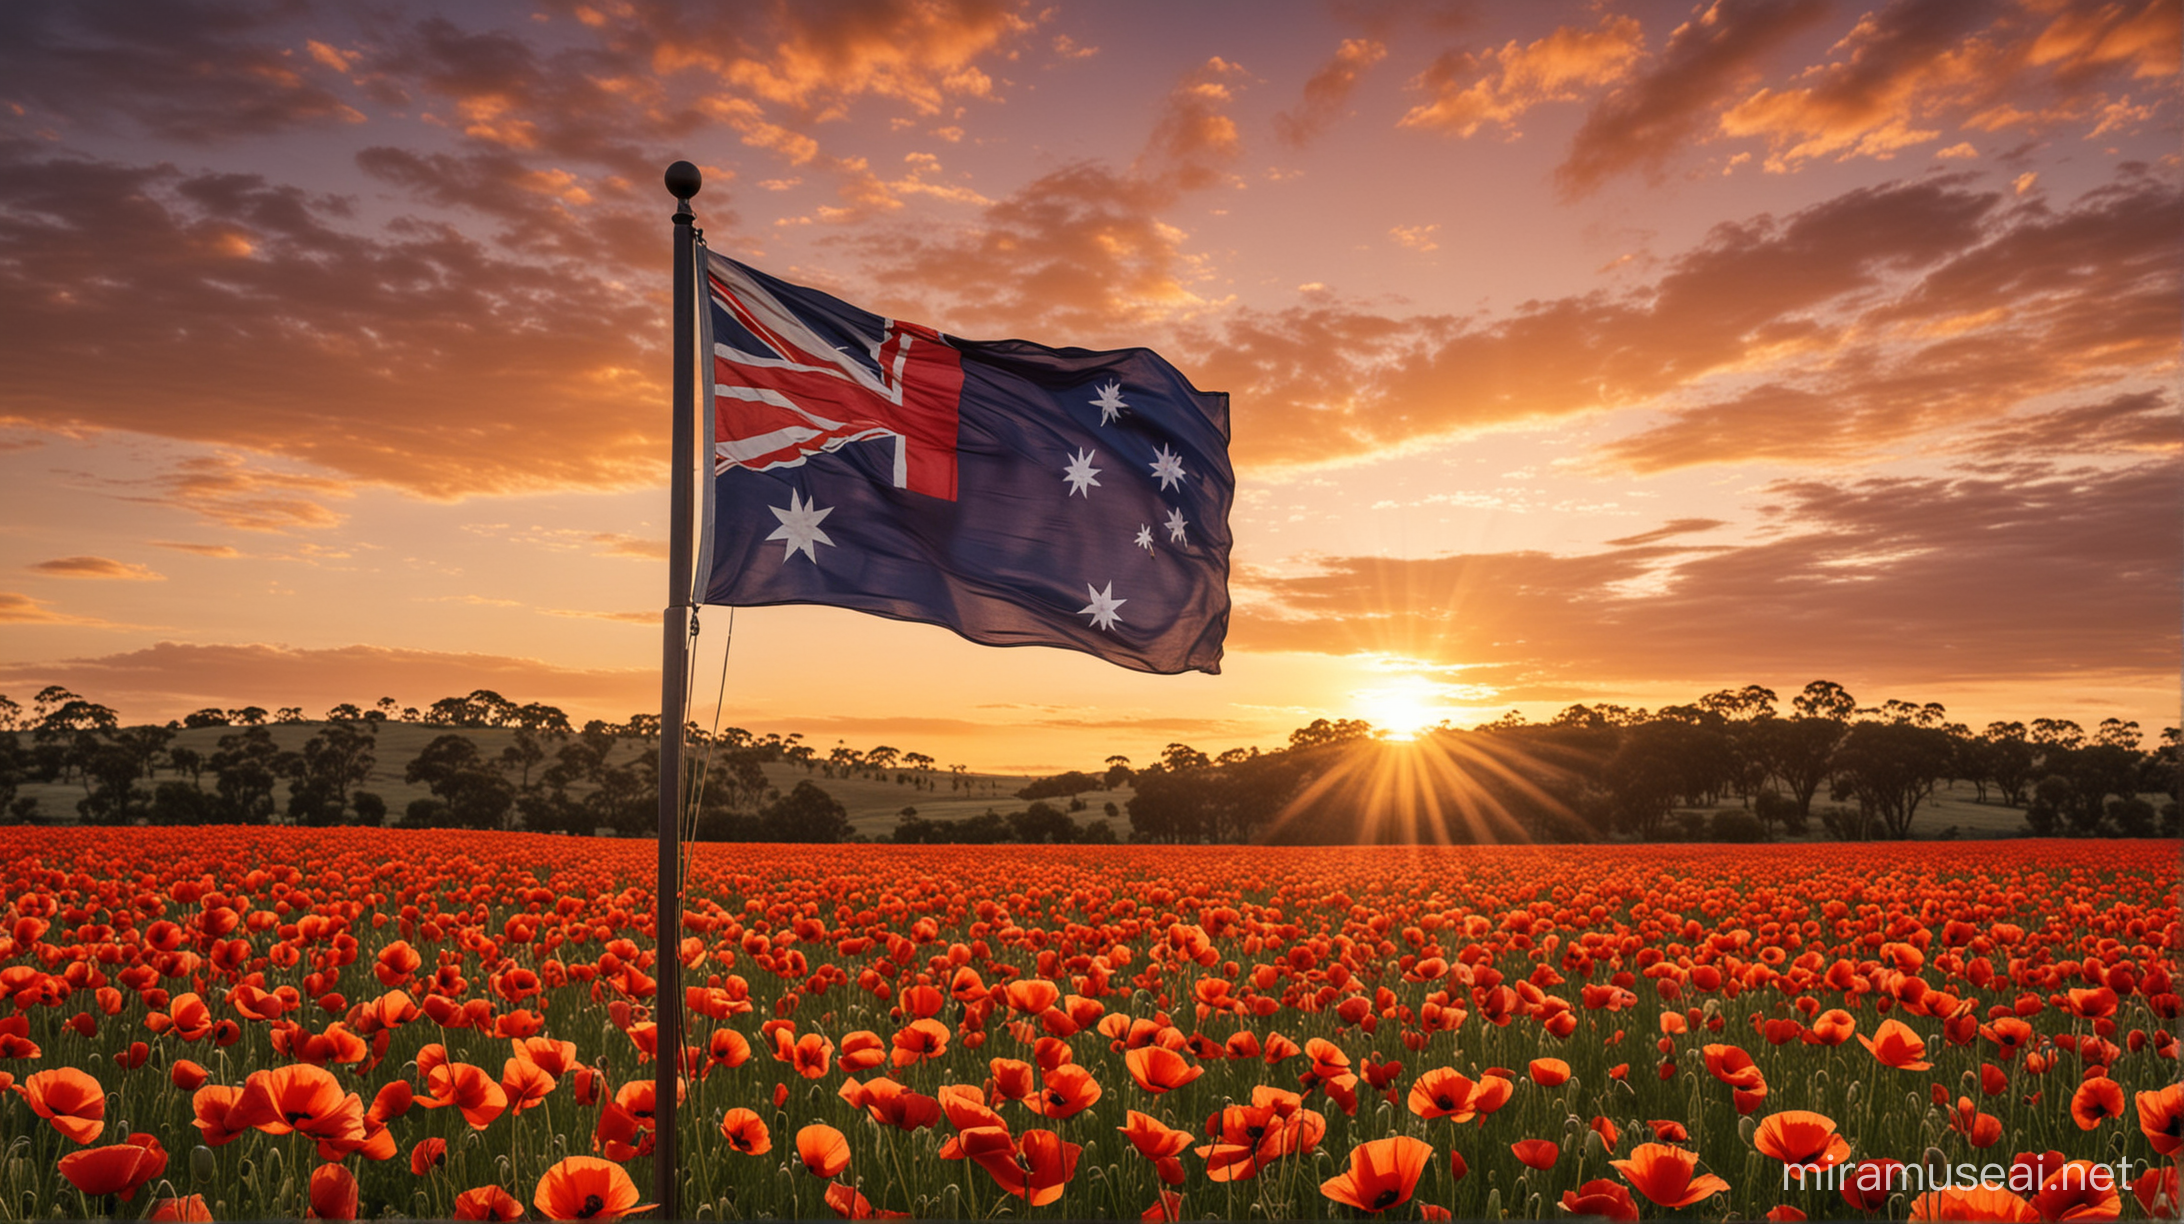 australian flag over poppy field with sun setting in the background